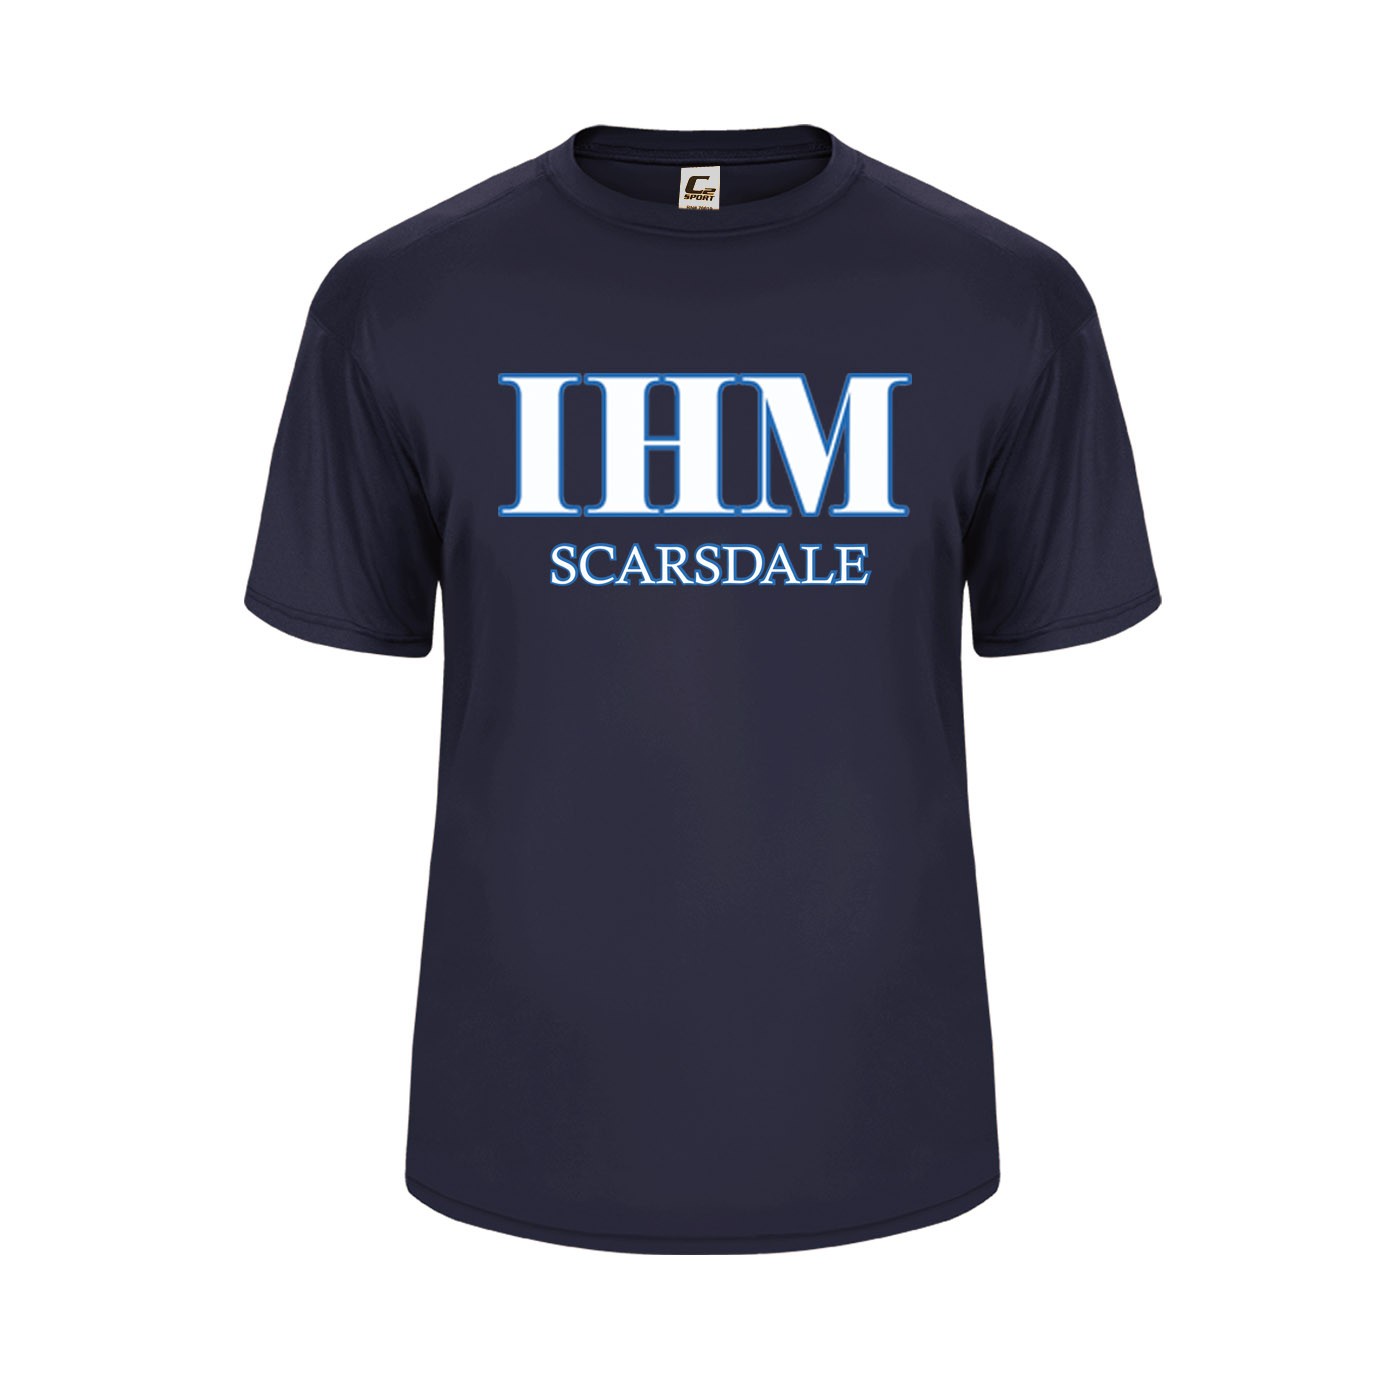 IHM Spirit S/S Performance T-Shirt w/ IHM Scarsdale Logo - Please Allow 2-3 Weeks for Delivery 